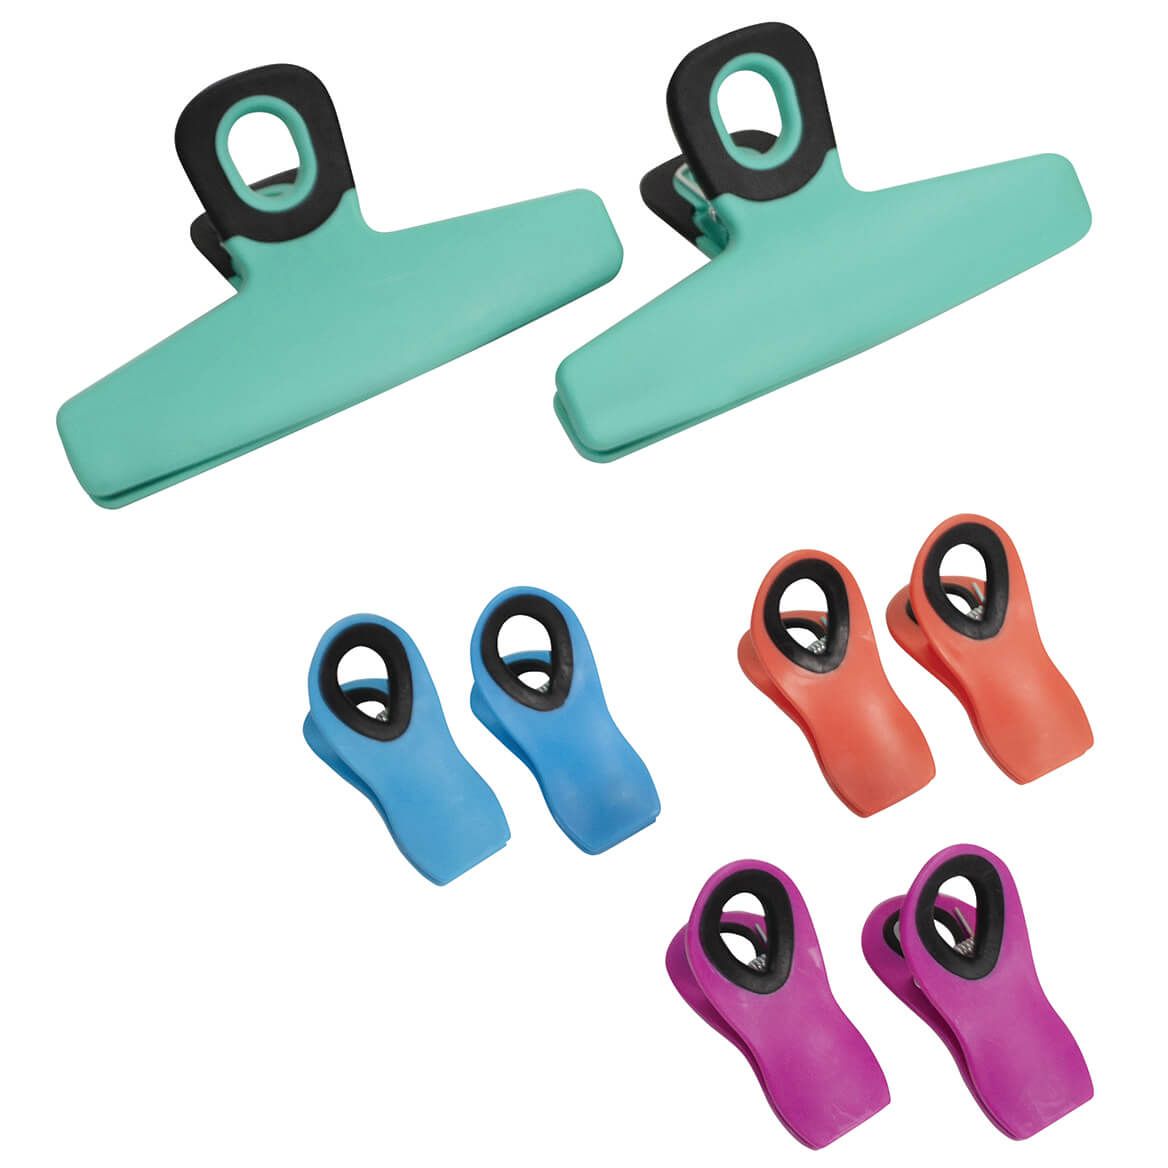 Stay-Fresh Bag Clips, Set of 8 + '-' + 376970